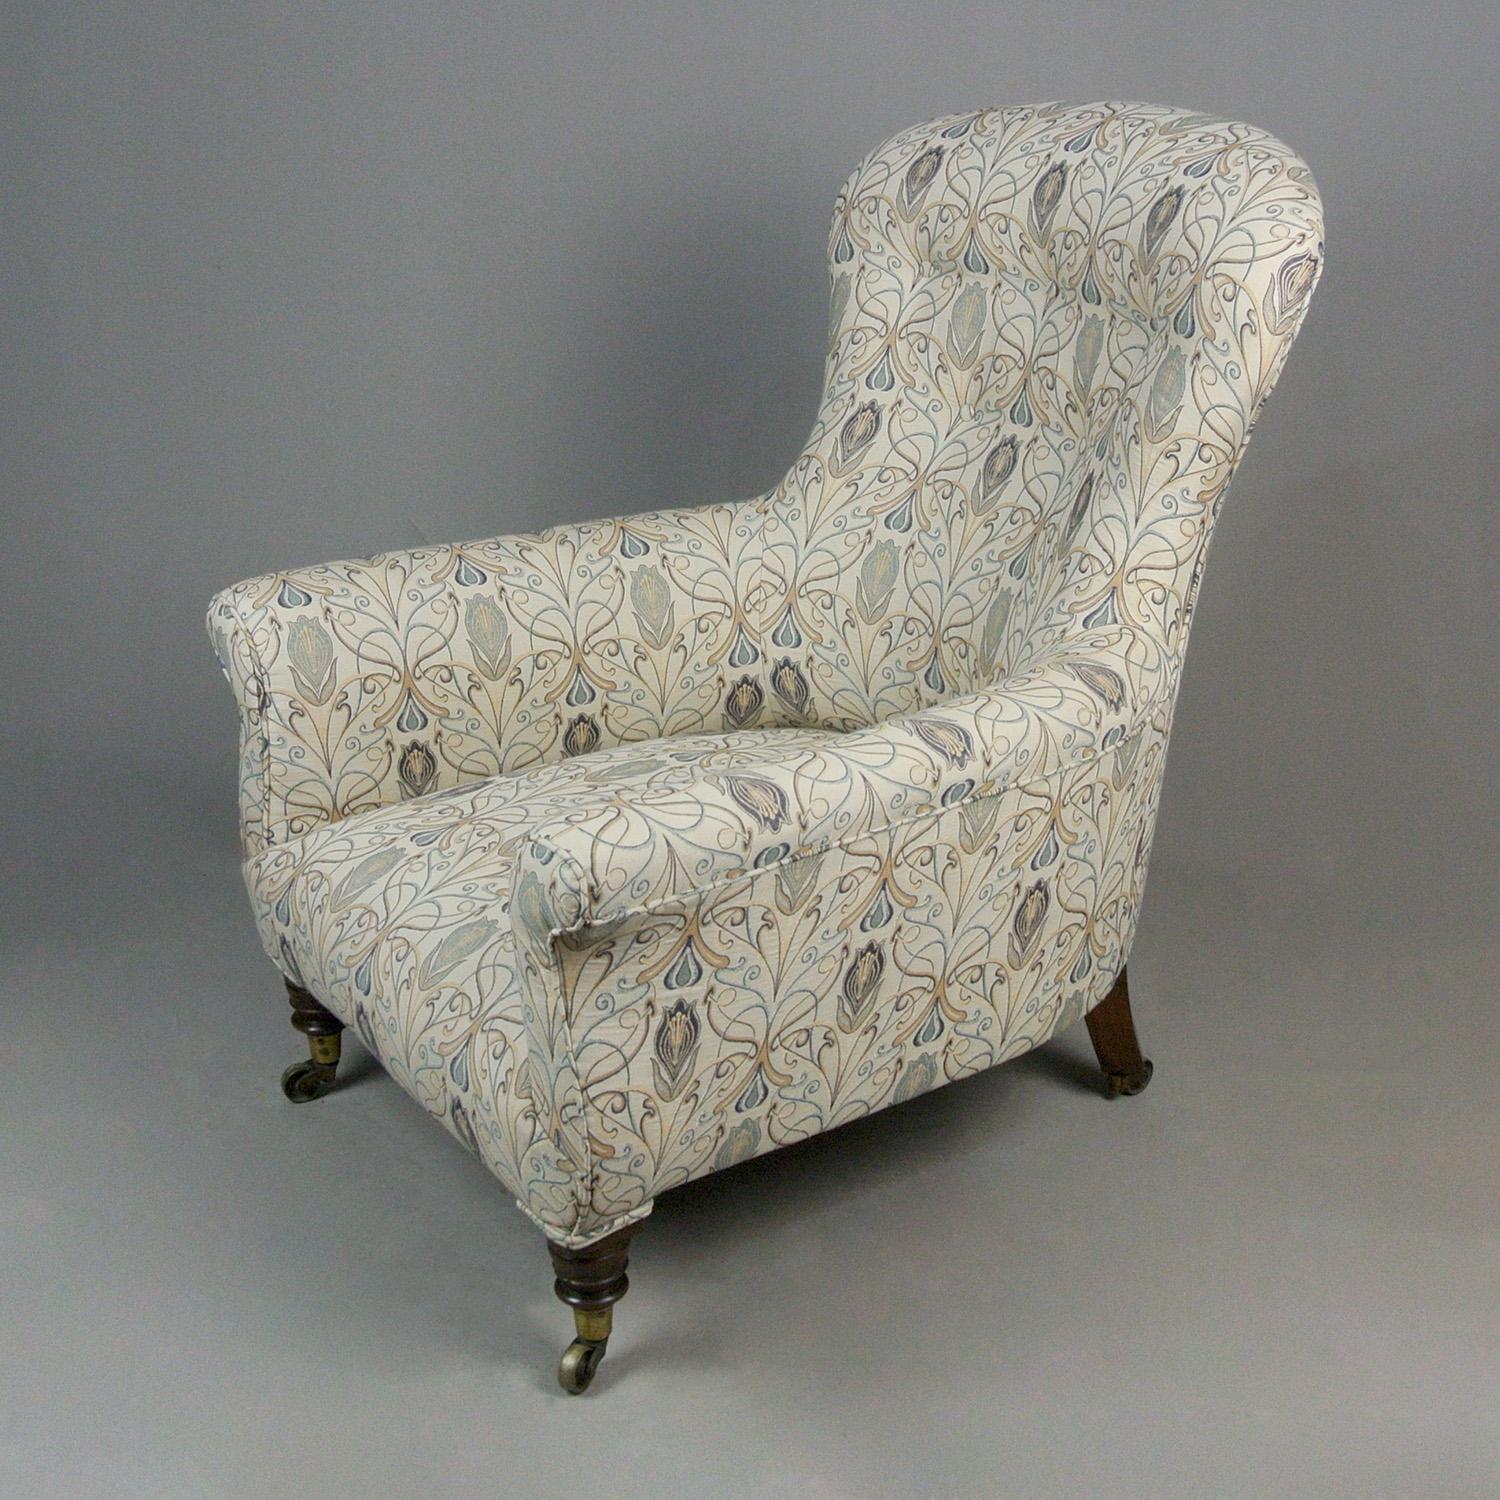 19th Century Victorian Button Back Arm Chair in the Manner of Howard and Sons c. 1870